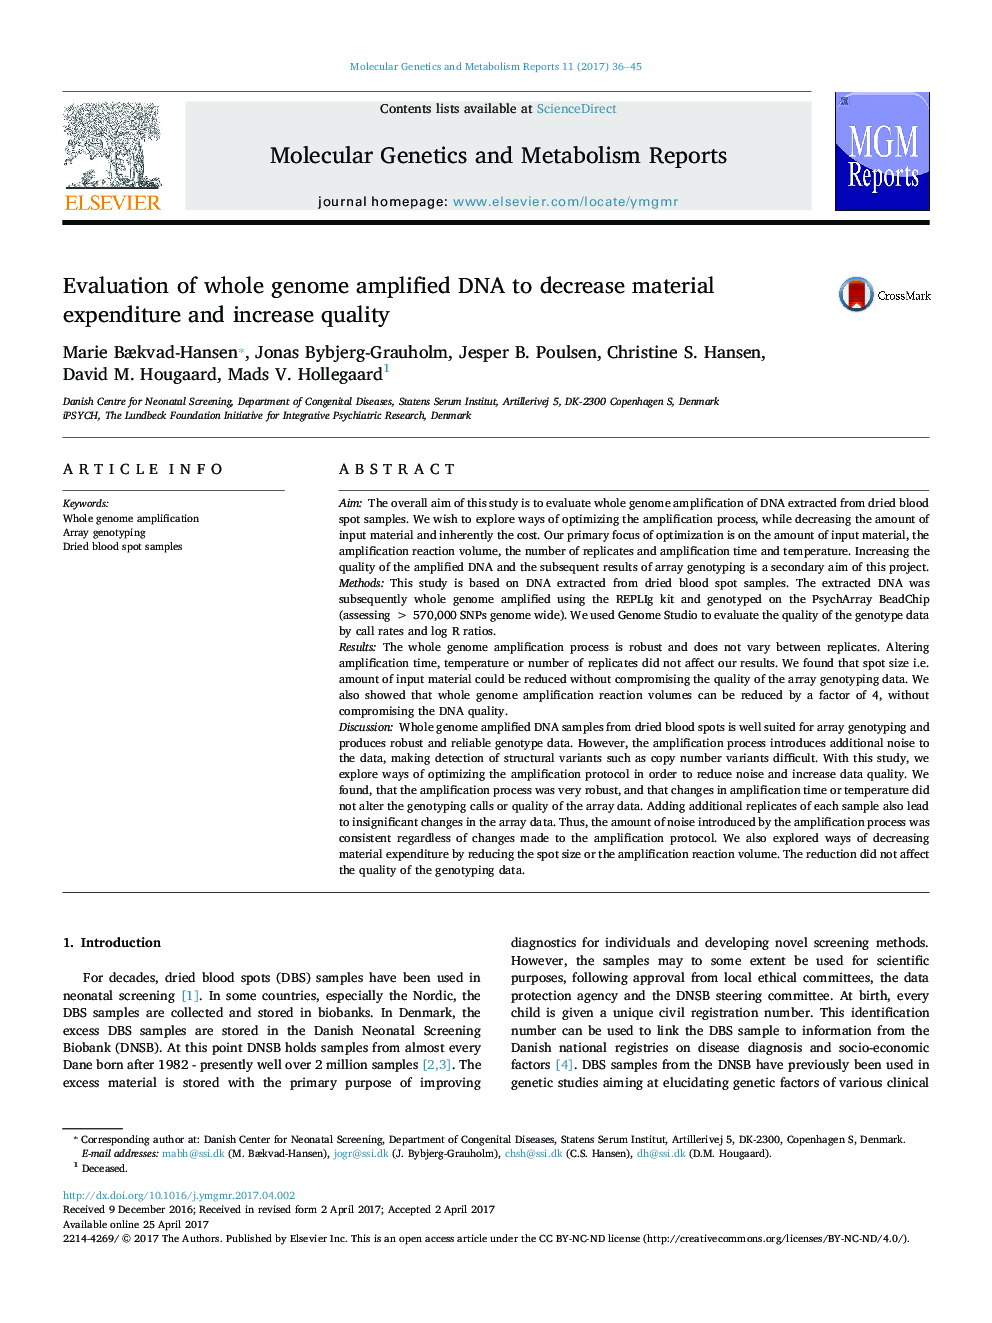 Evaluation of whole genome amplified DNA to decrease material expenditure and increase quality